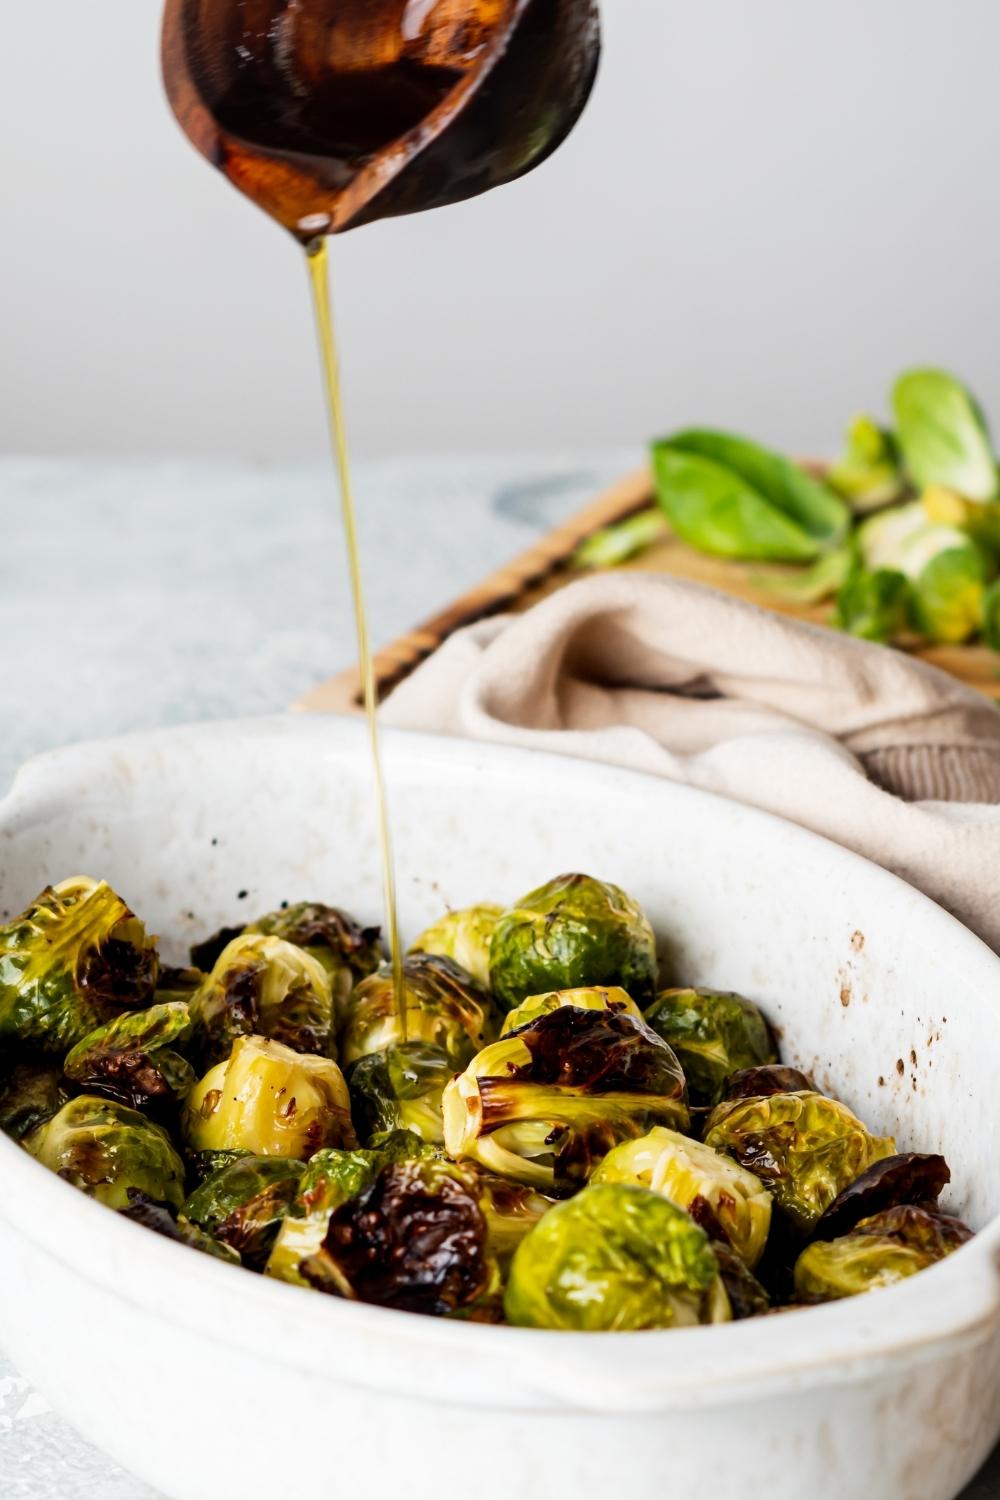 A casserole dish with cooked brussels sprouts. A small spouted cup s pouring honey onto the sprouts.